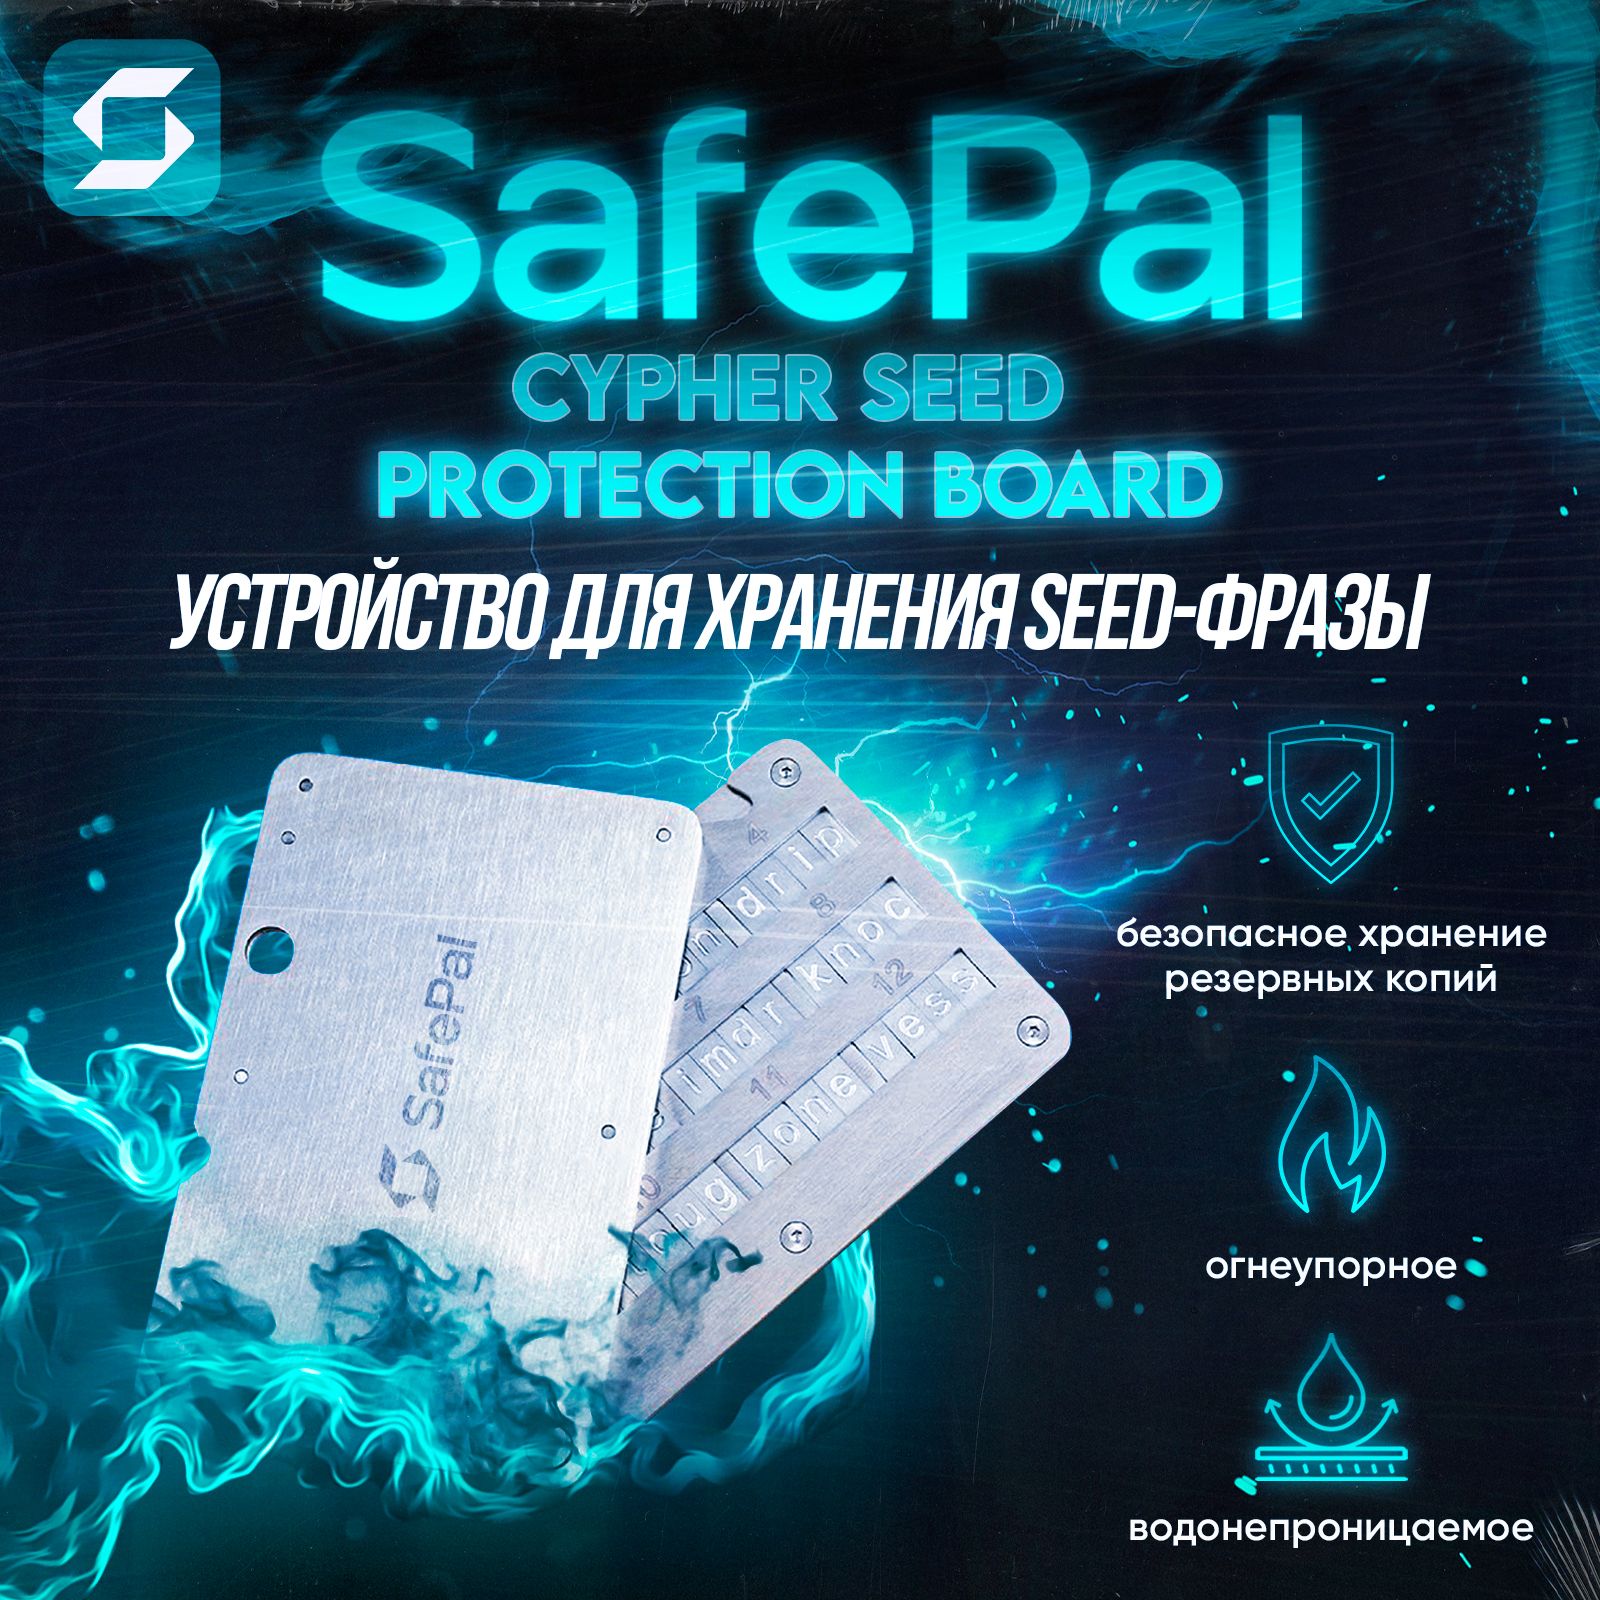 Cypher Seed Board. SAFEPAL Cypher Seed. SAFEPAL Cypher Seed Protection Board. SAFEPAL Cypher Metallic Seed Board. Safepal отзывы